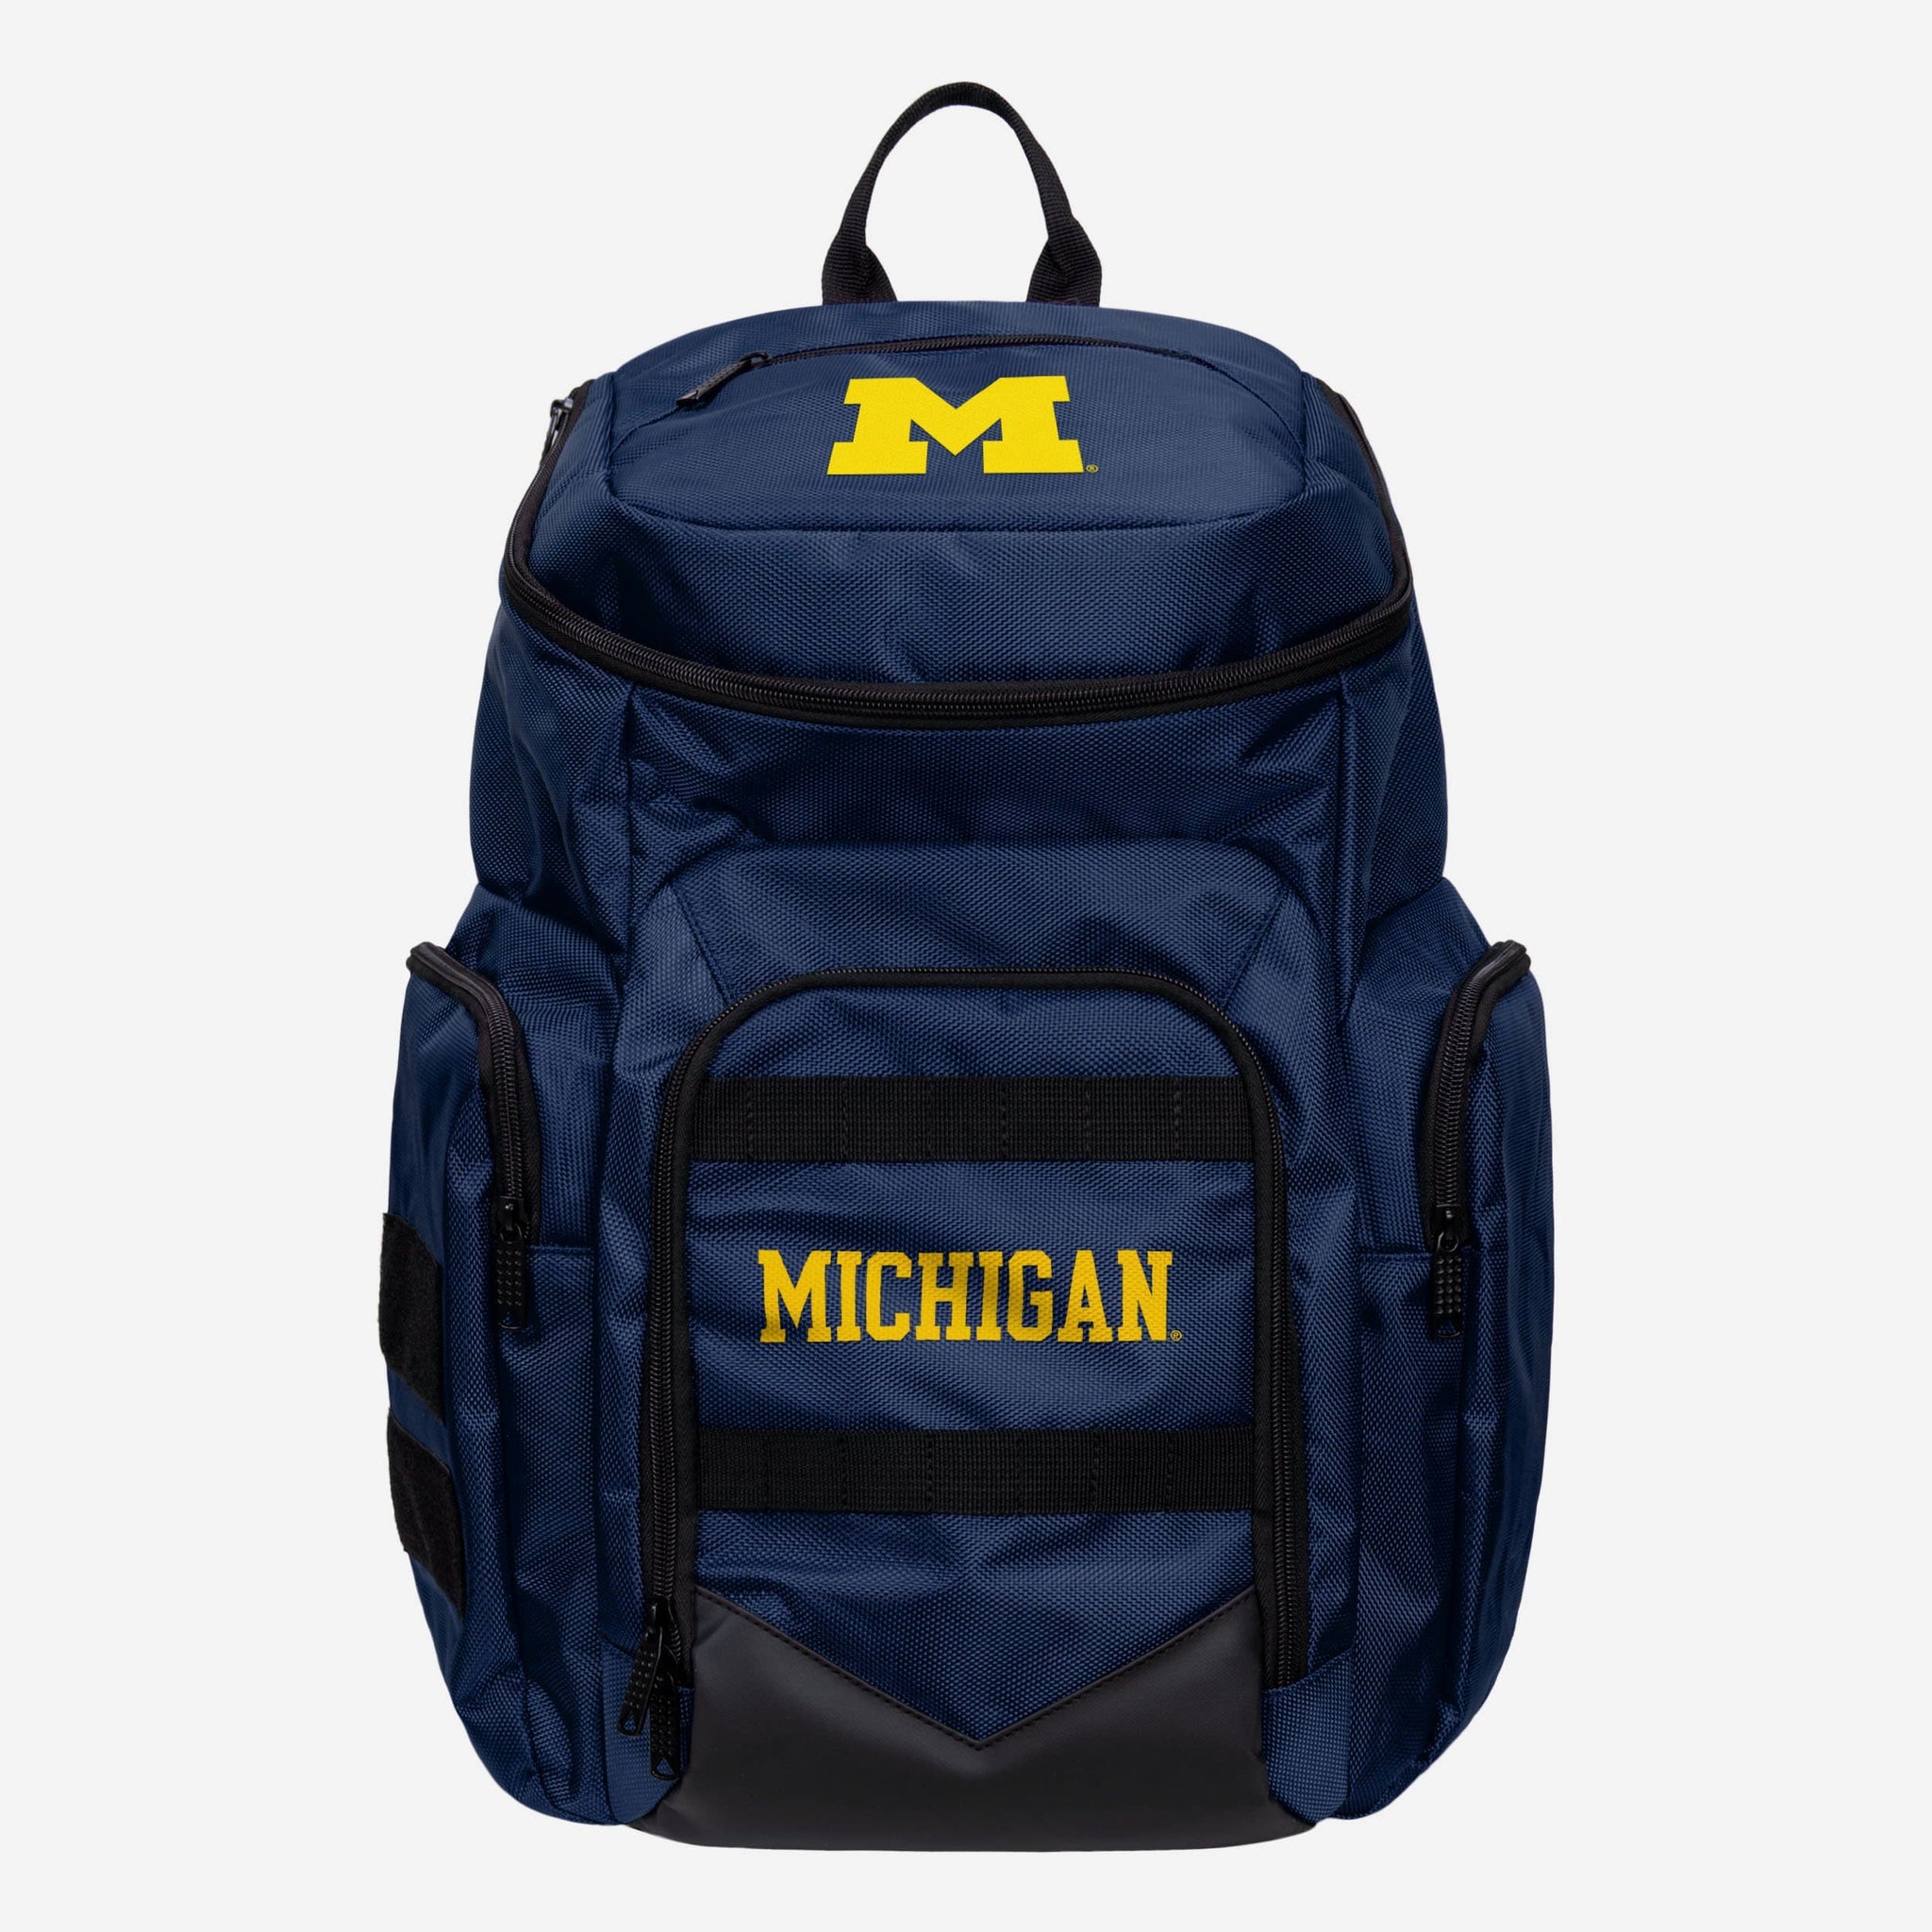 ST. LOUIS BLUES FOCO ACTION BACKPACK